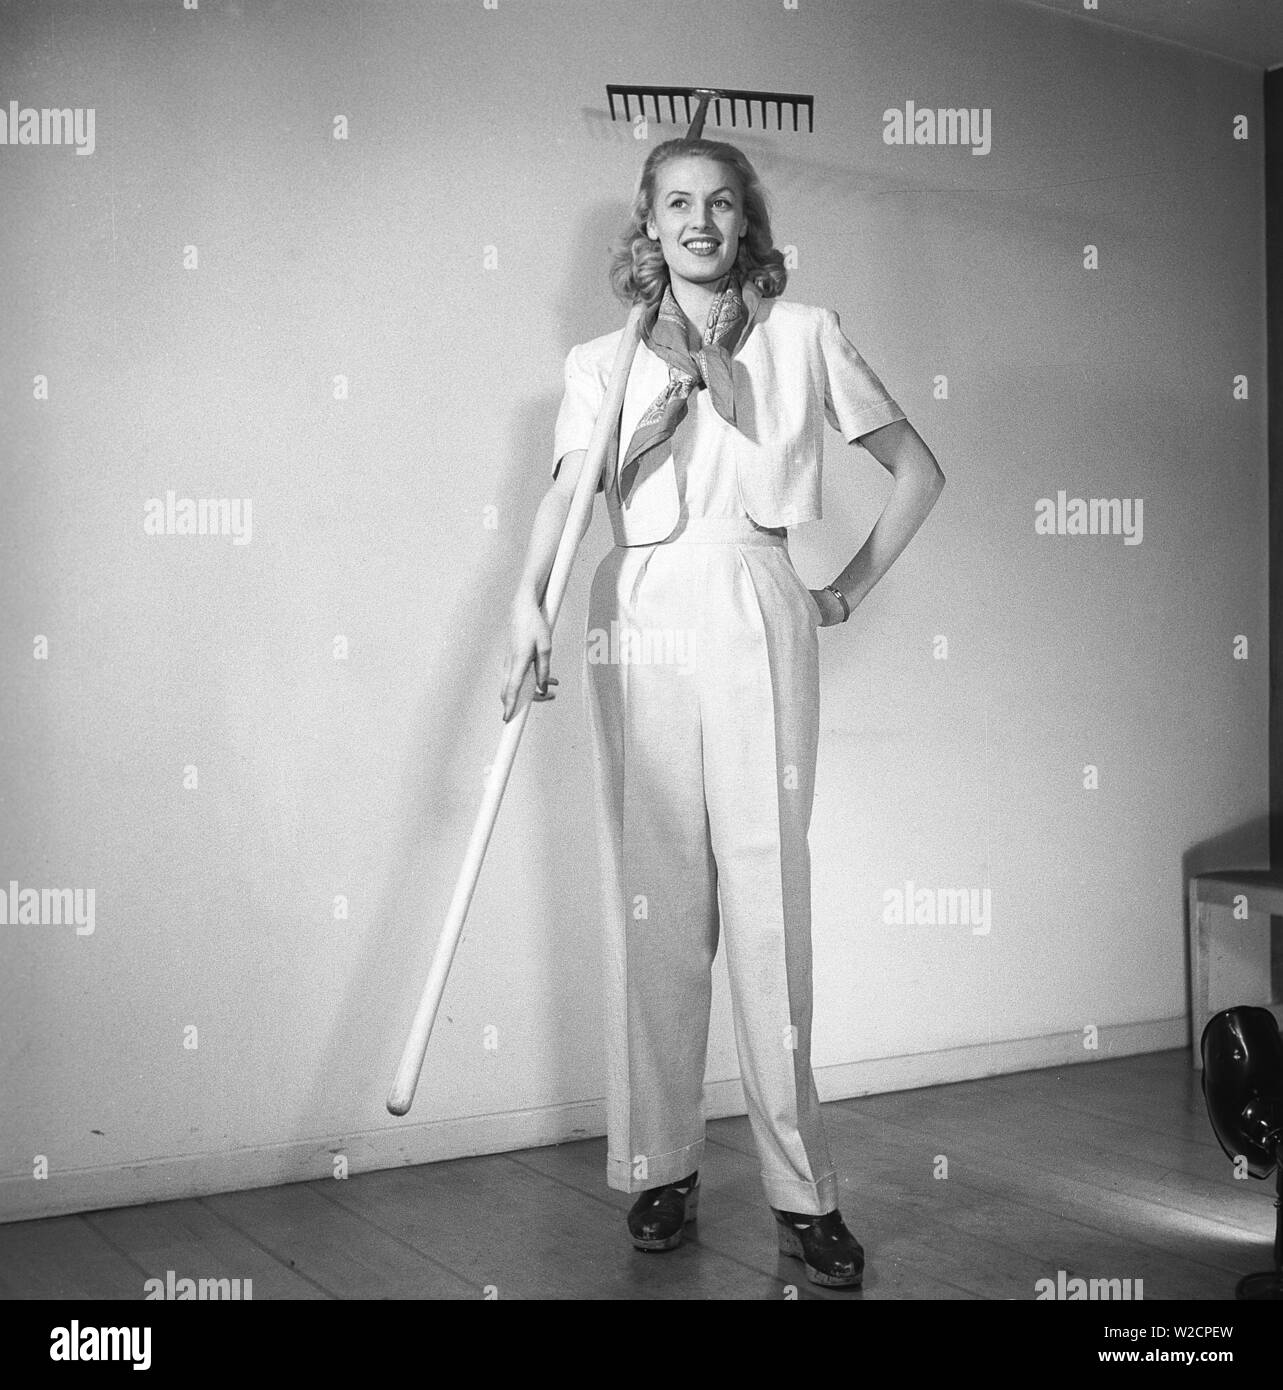 1940s summer outfit. A young blonde woman wears a practical summer outfit with long white trousers and a short jacket. By holding a rake it's implied that she is dressed for garden work.  Sweden 1947 Kristoffersson Z25-3 Stock Photo